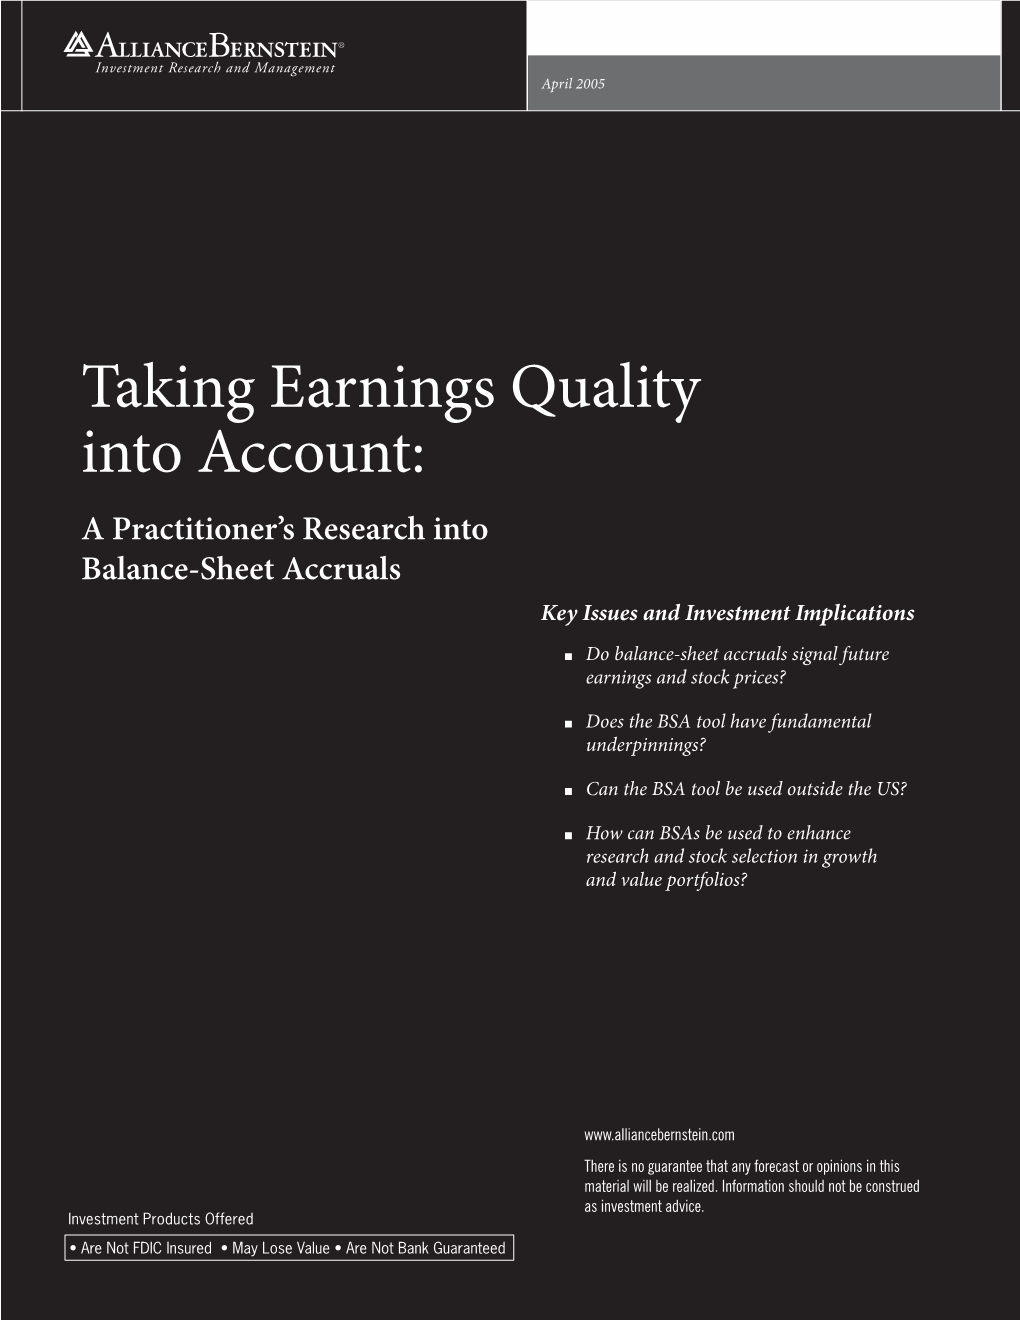 Taking Earnings Quality Into Account: a Practitioner’S Research Into Balance-Sheet Accruals Key Issues and Investment Implications